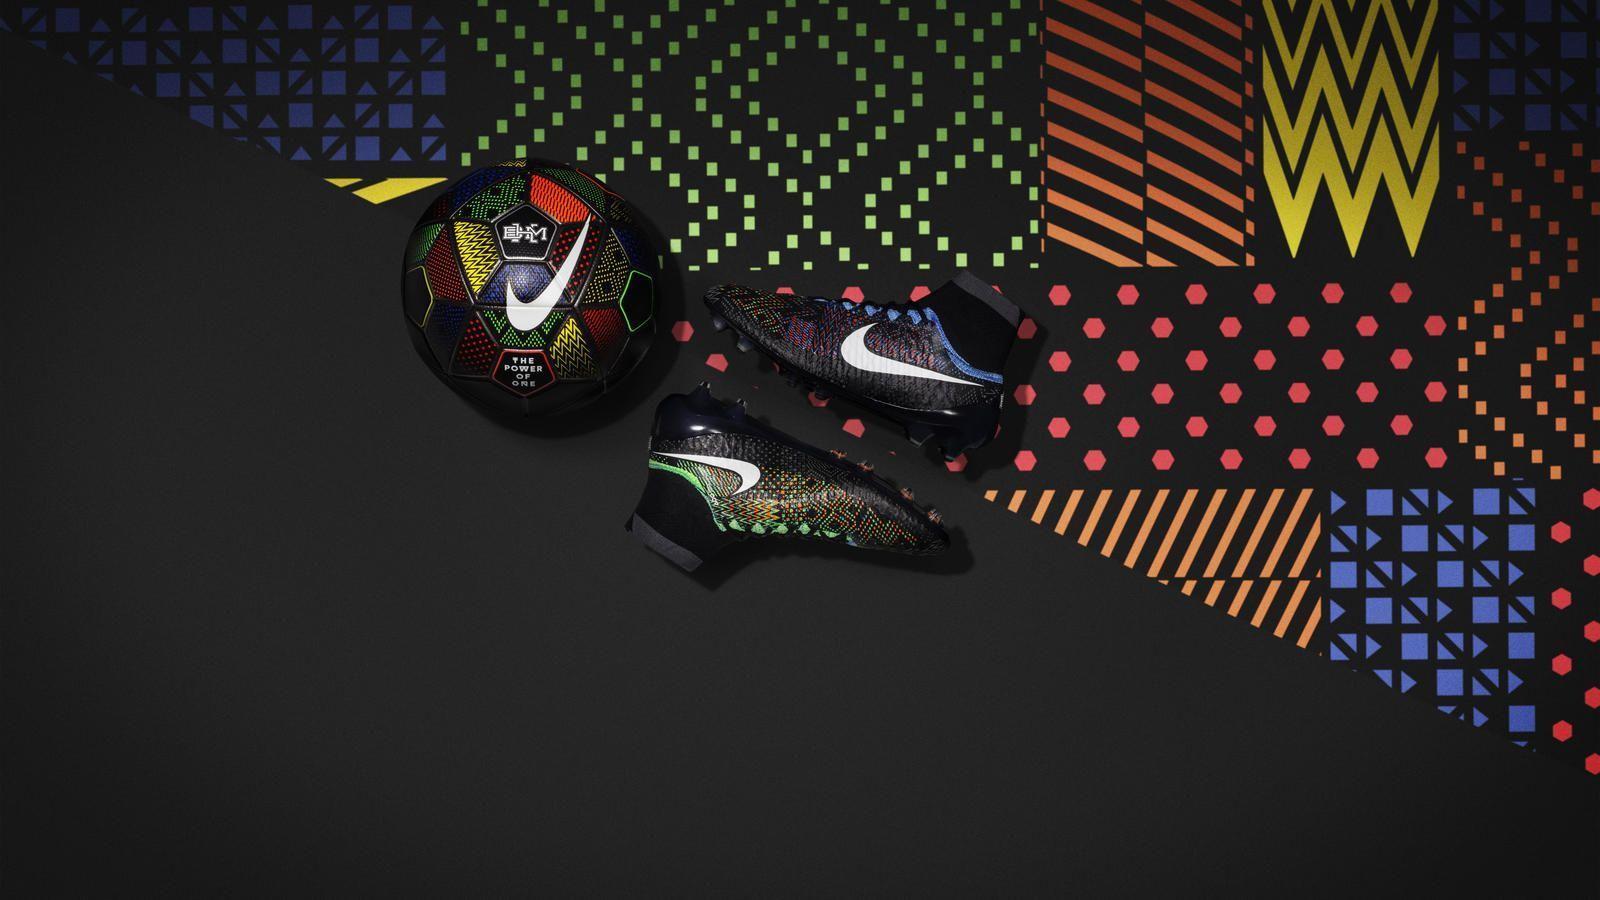 The 2016 NIKE Black History Month collection is here